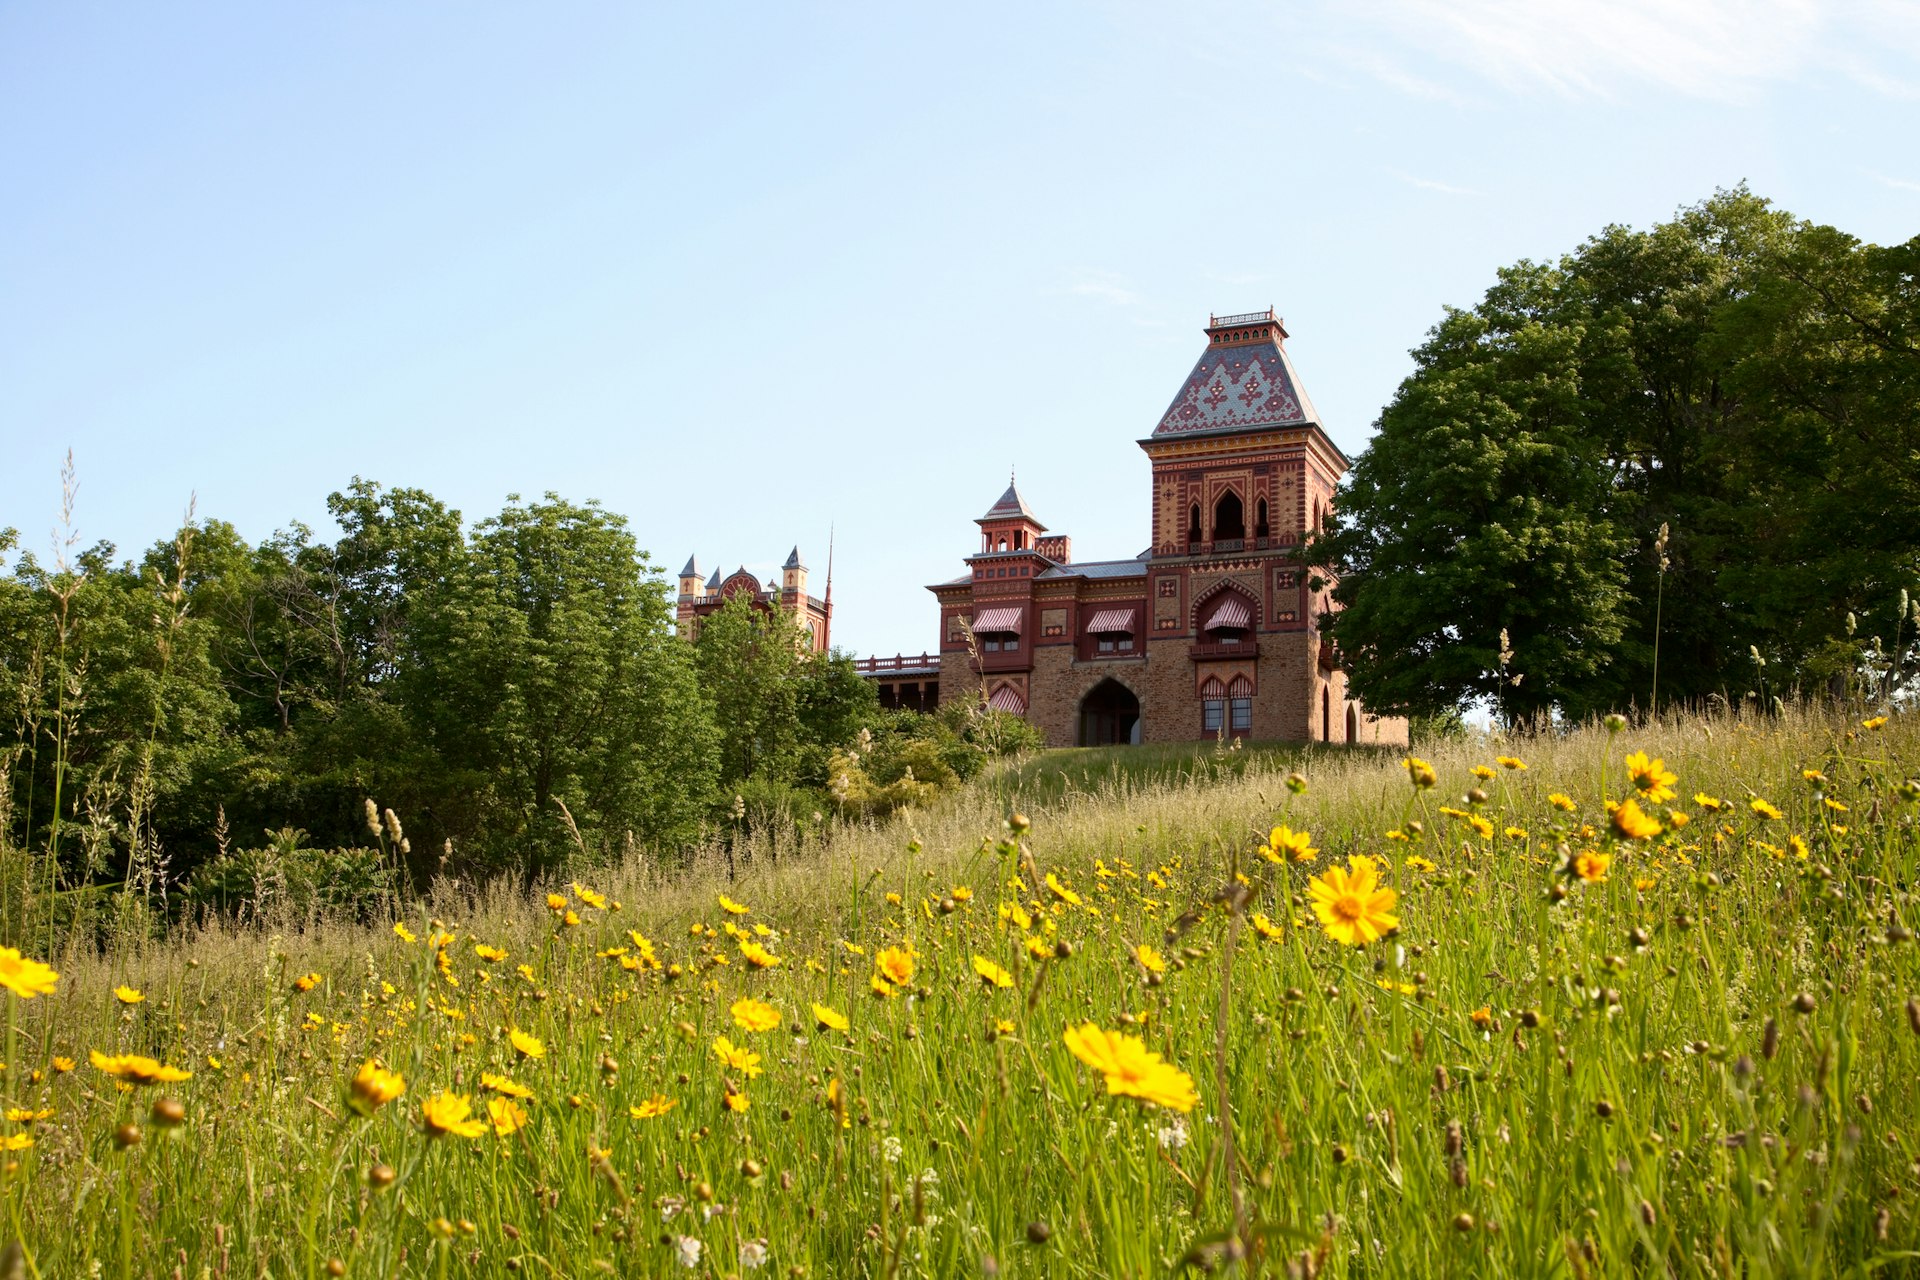 Olana, the estate of Hudson River School artist Frederic Edwin Church, in a meadow full of blooming yellow flowers